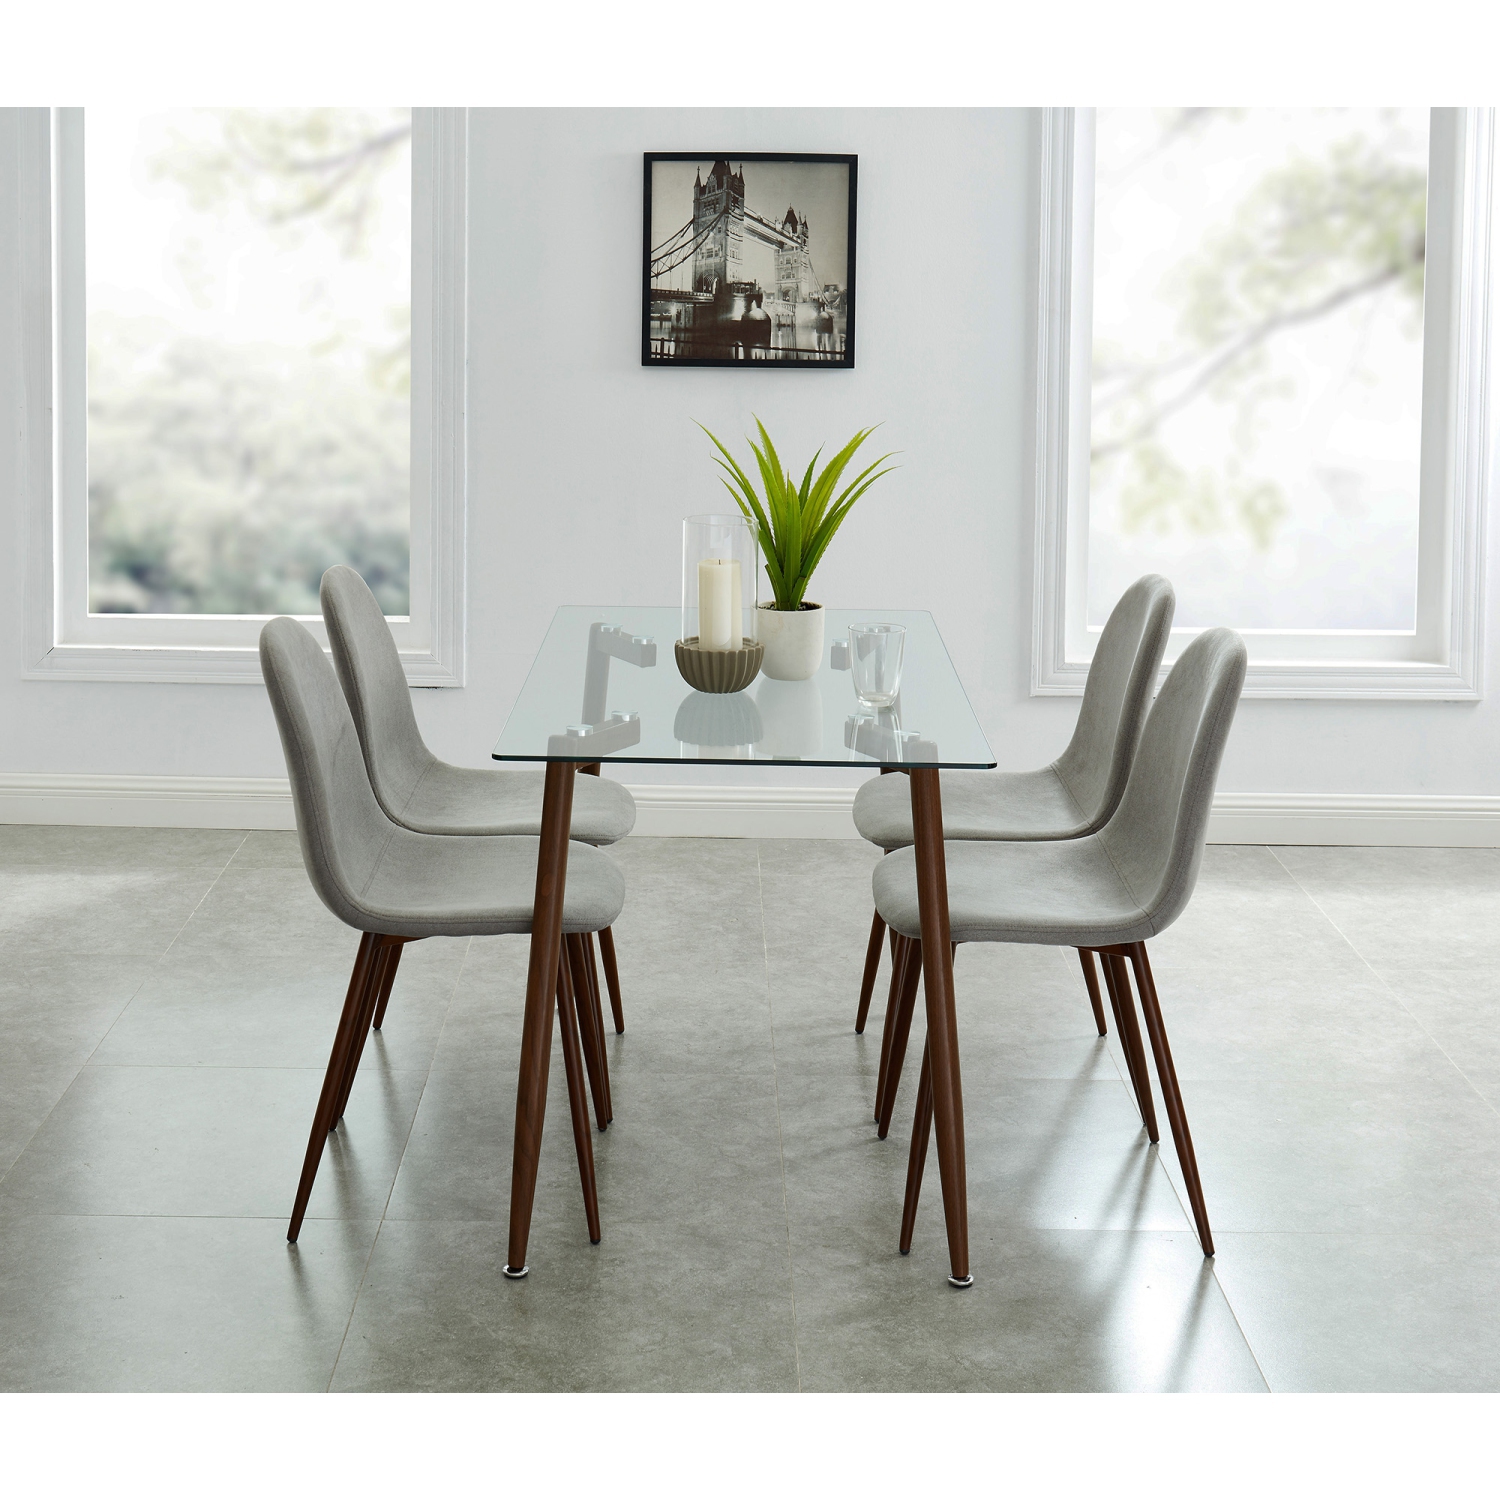 Viva Lifestyle Furniture 5pc Dining Set |Walnut Table:8mm Clear, Tempered Glass Top | Grey Chair:Mid-Century Modern Styling | Compact Design Perfect for Smaller Spaces